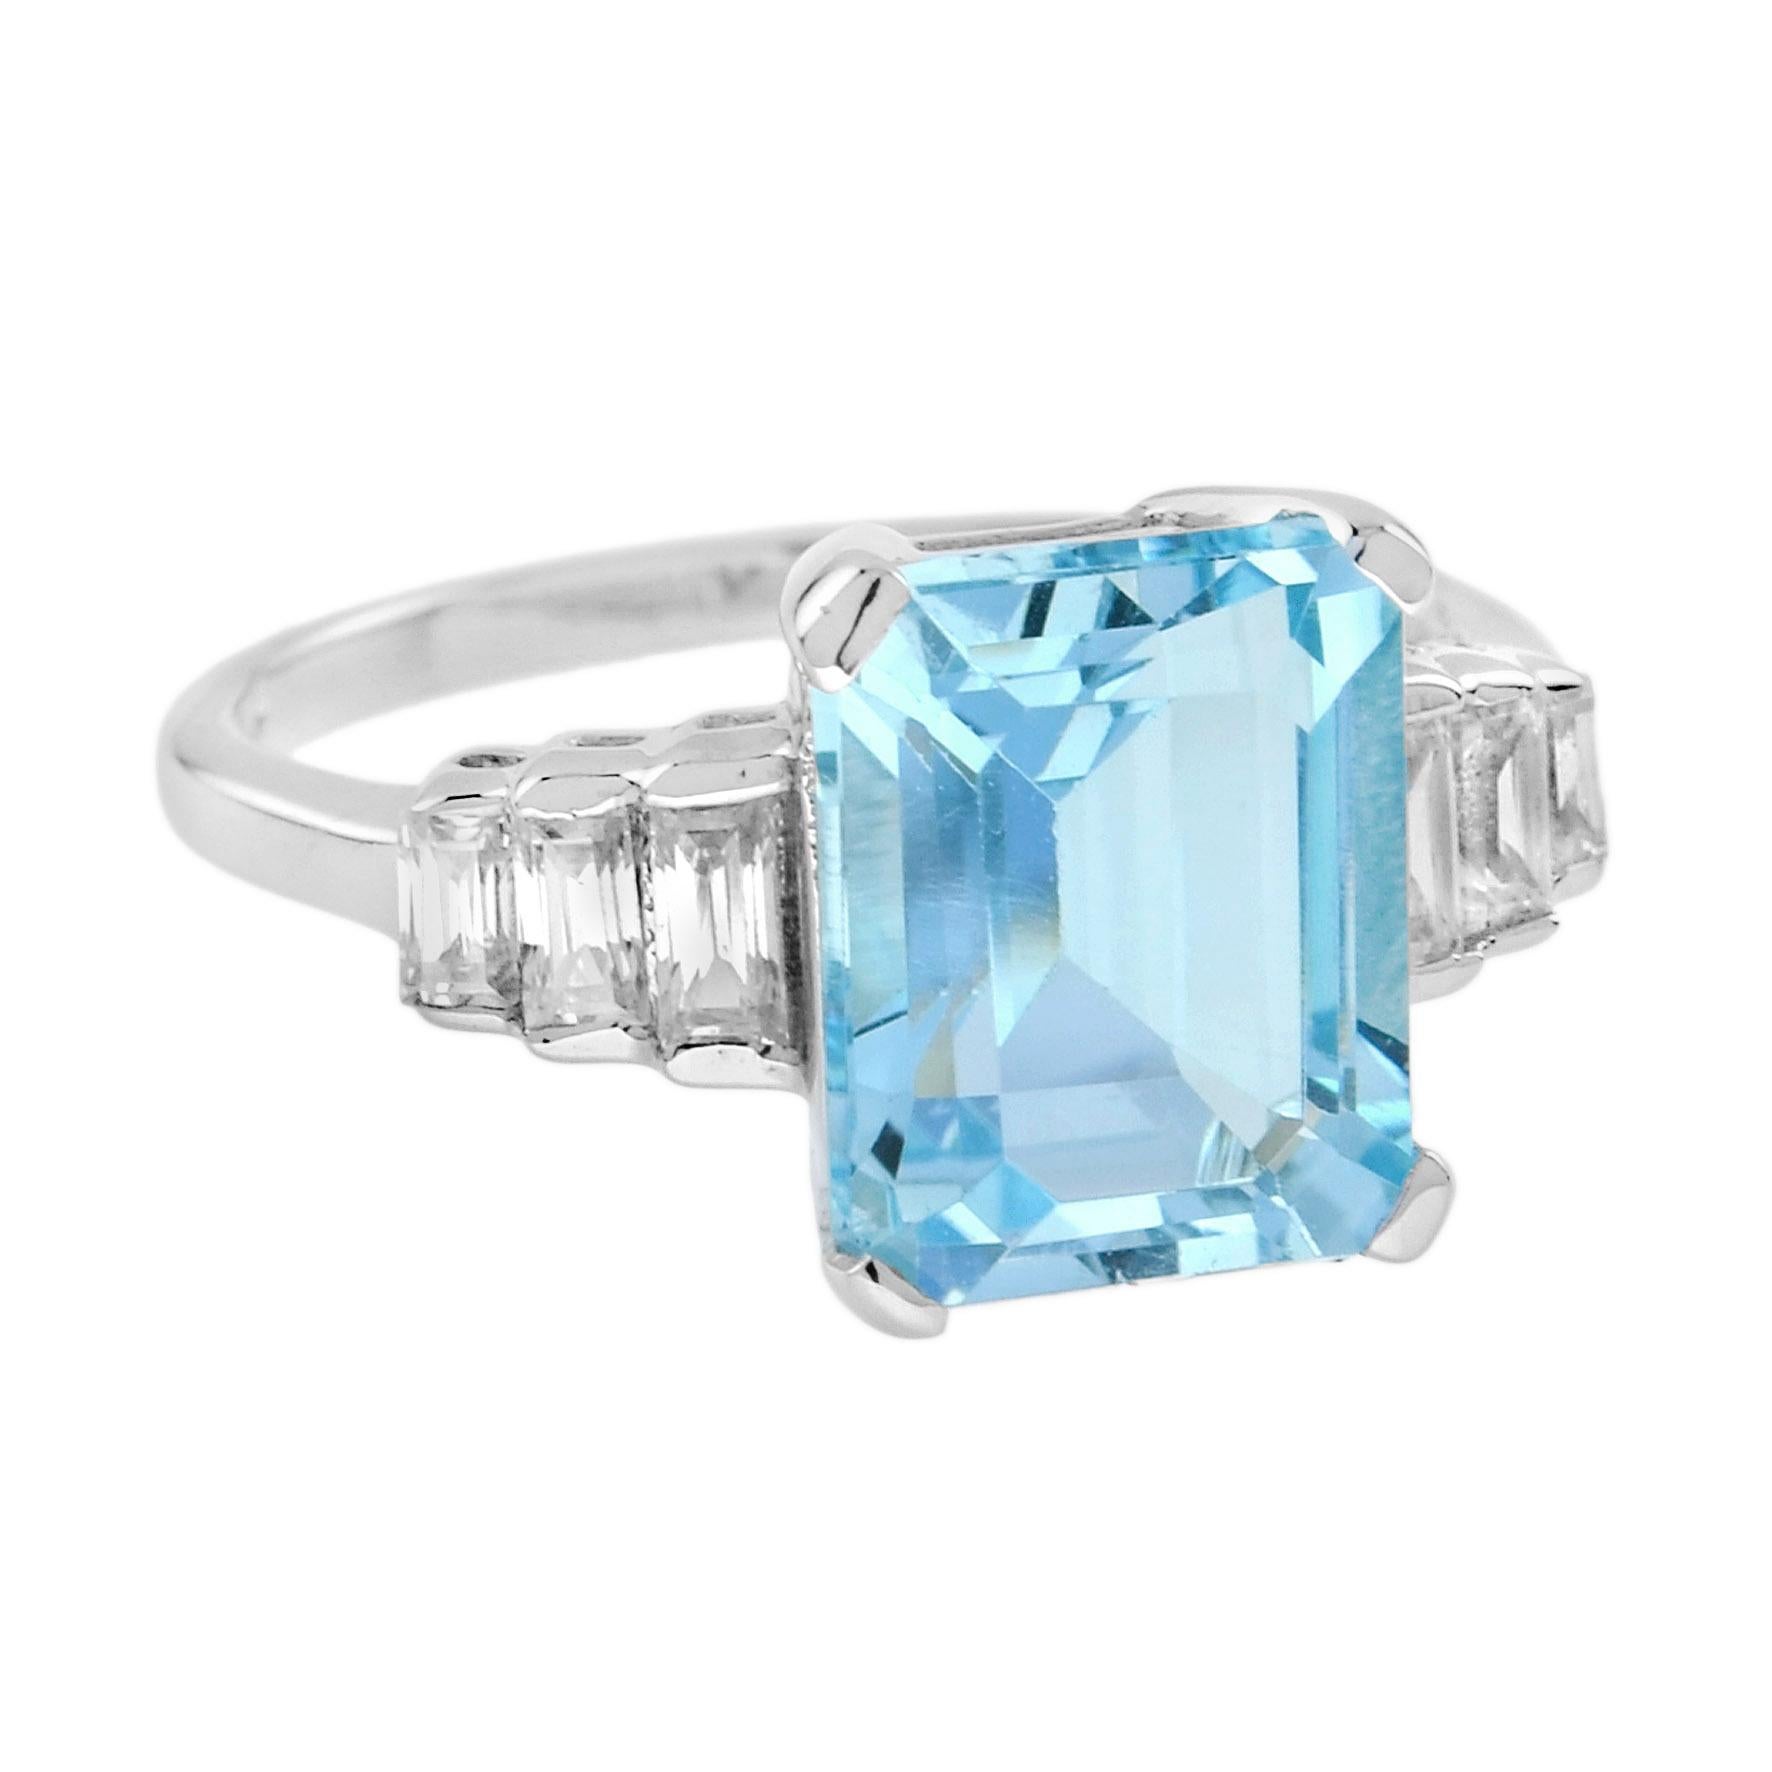 Art Deco Aquamarine and Baguette Diamond Engagement Ring in 18K White Gold For Sale